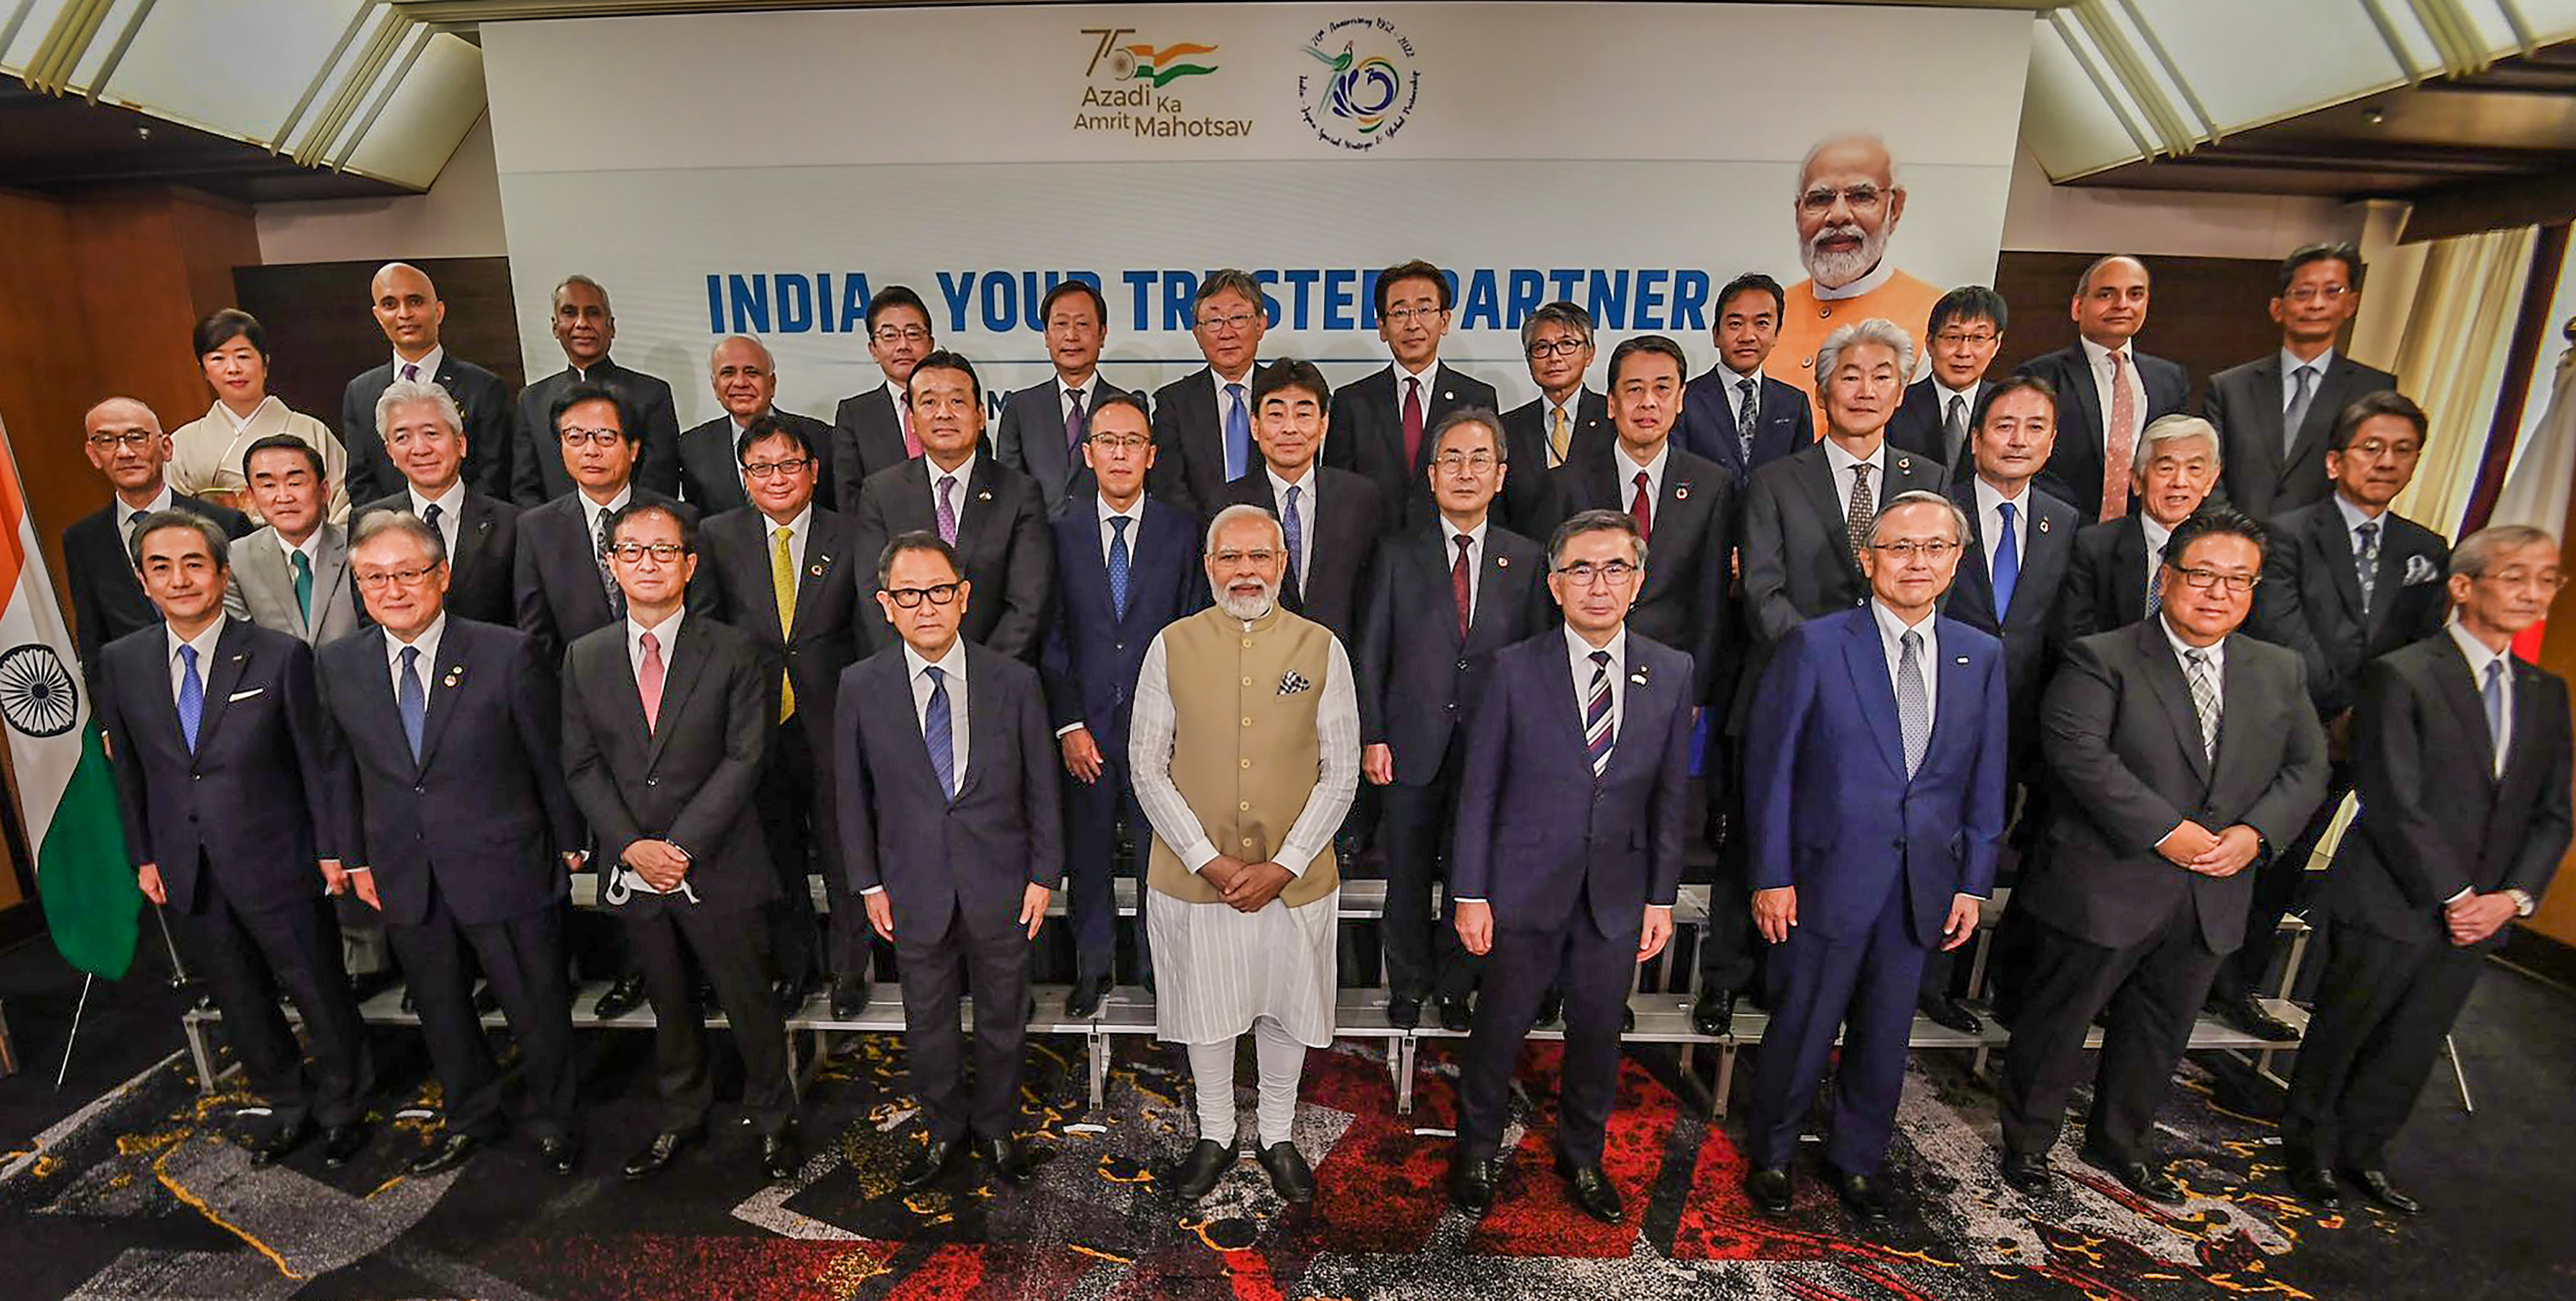 PM Modi meets Japanese business leaders, discusses investment opportunities in India